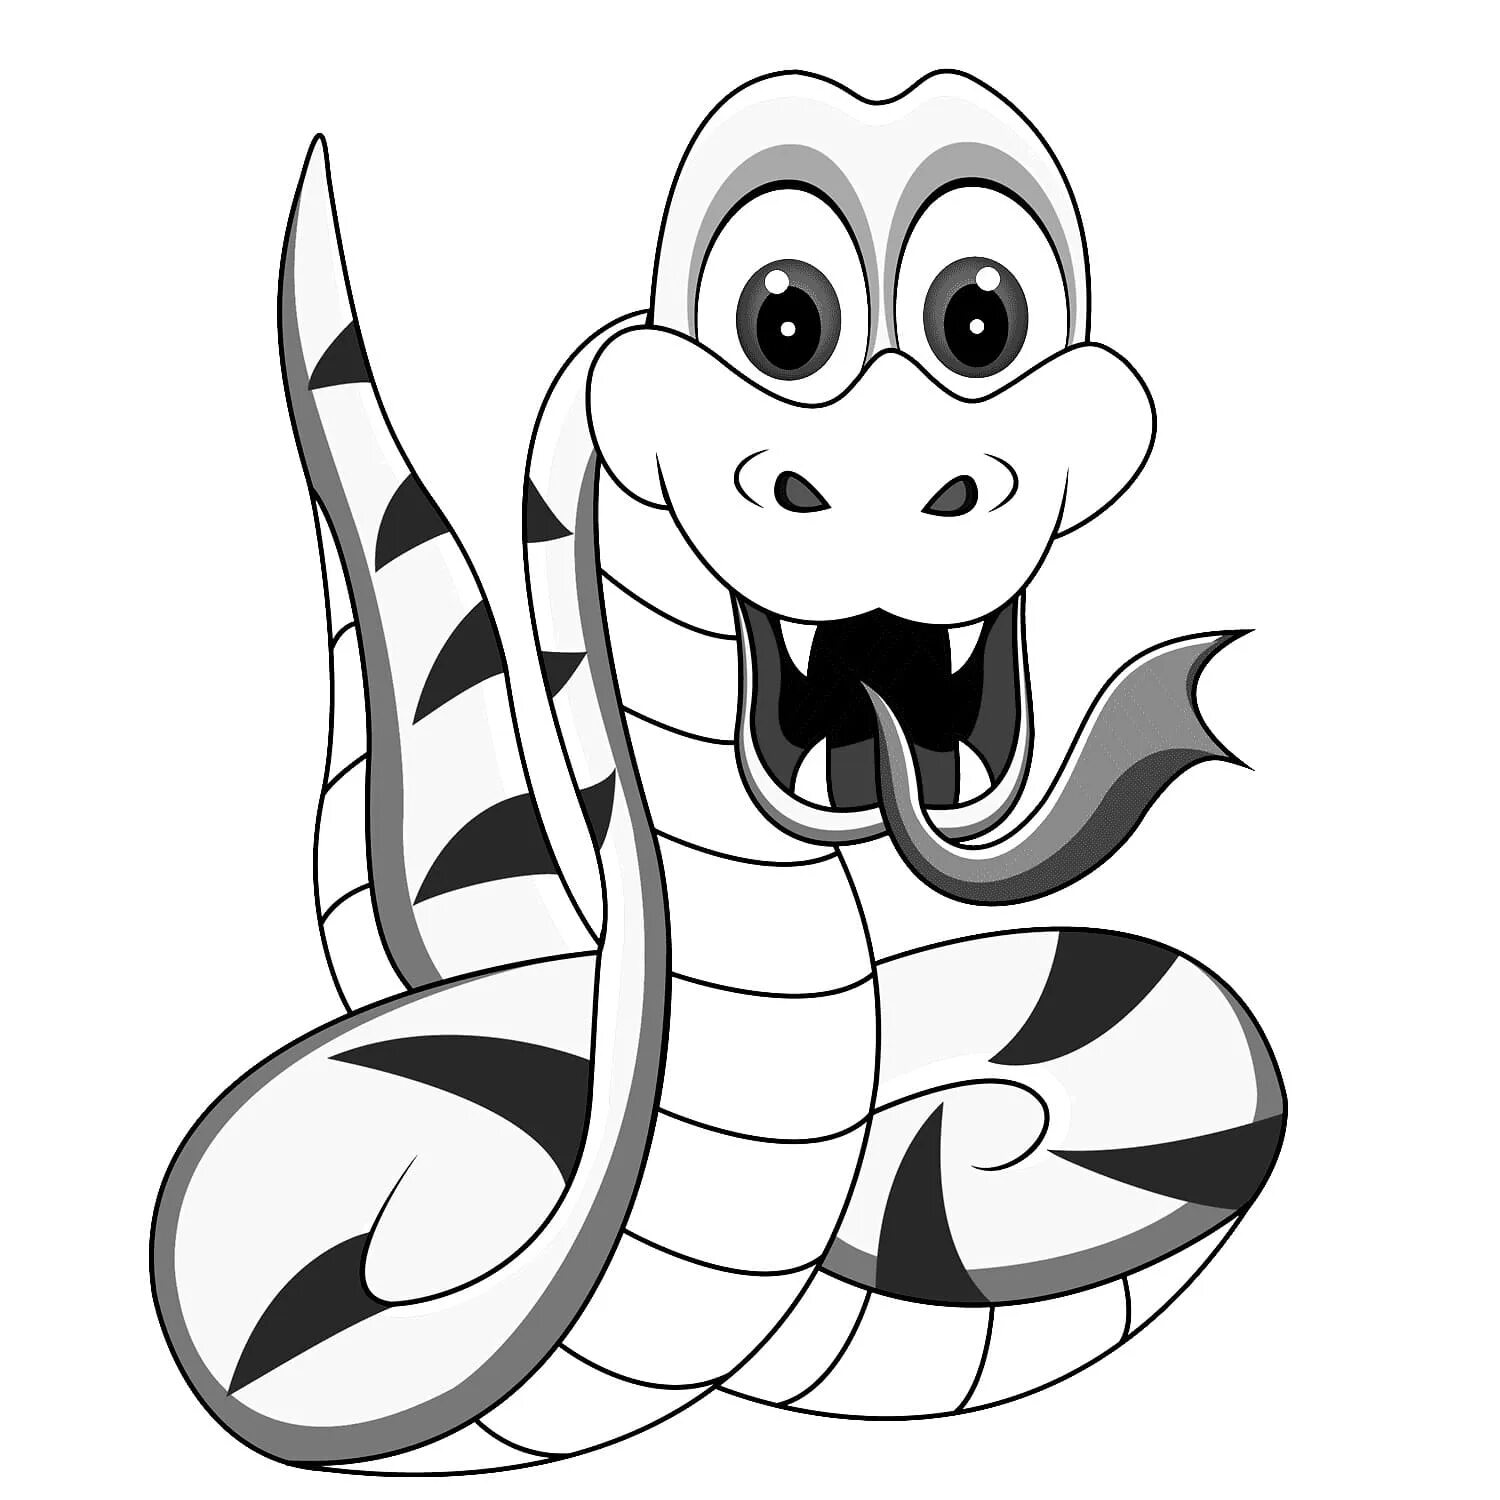 Zany snake coloring book for kids